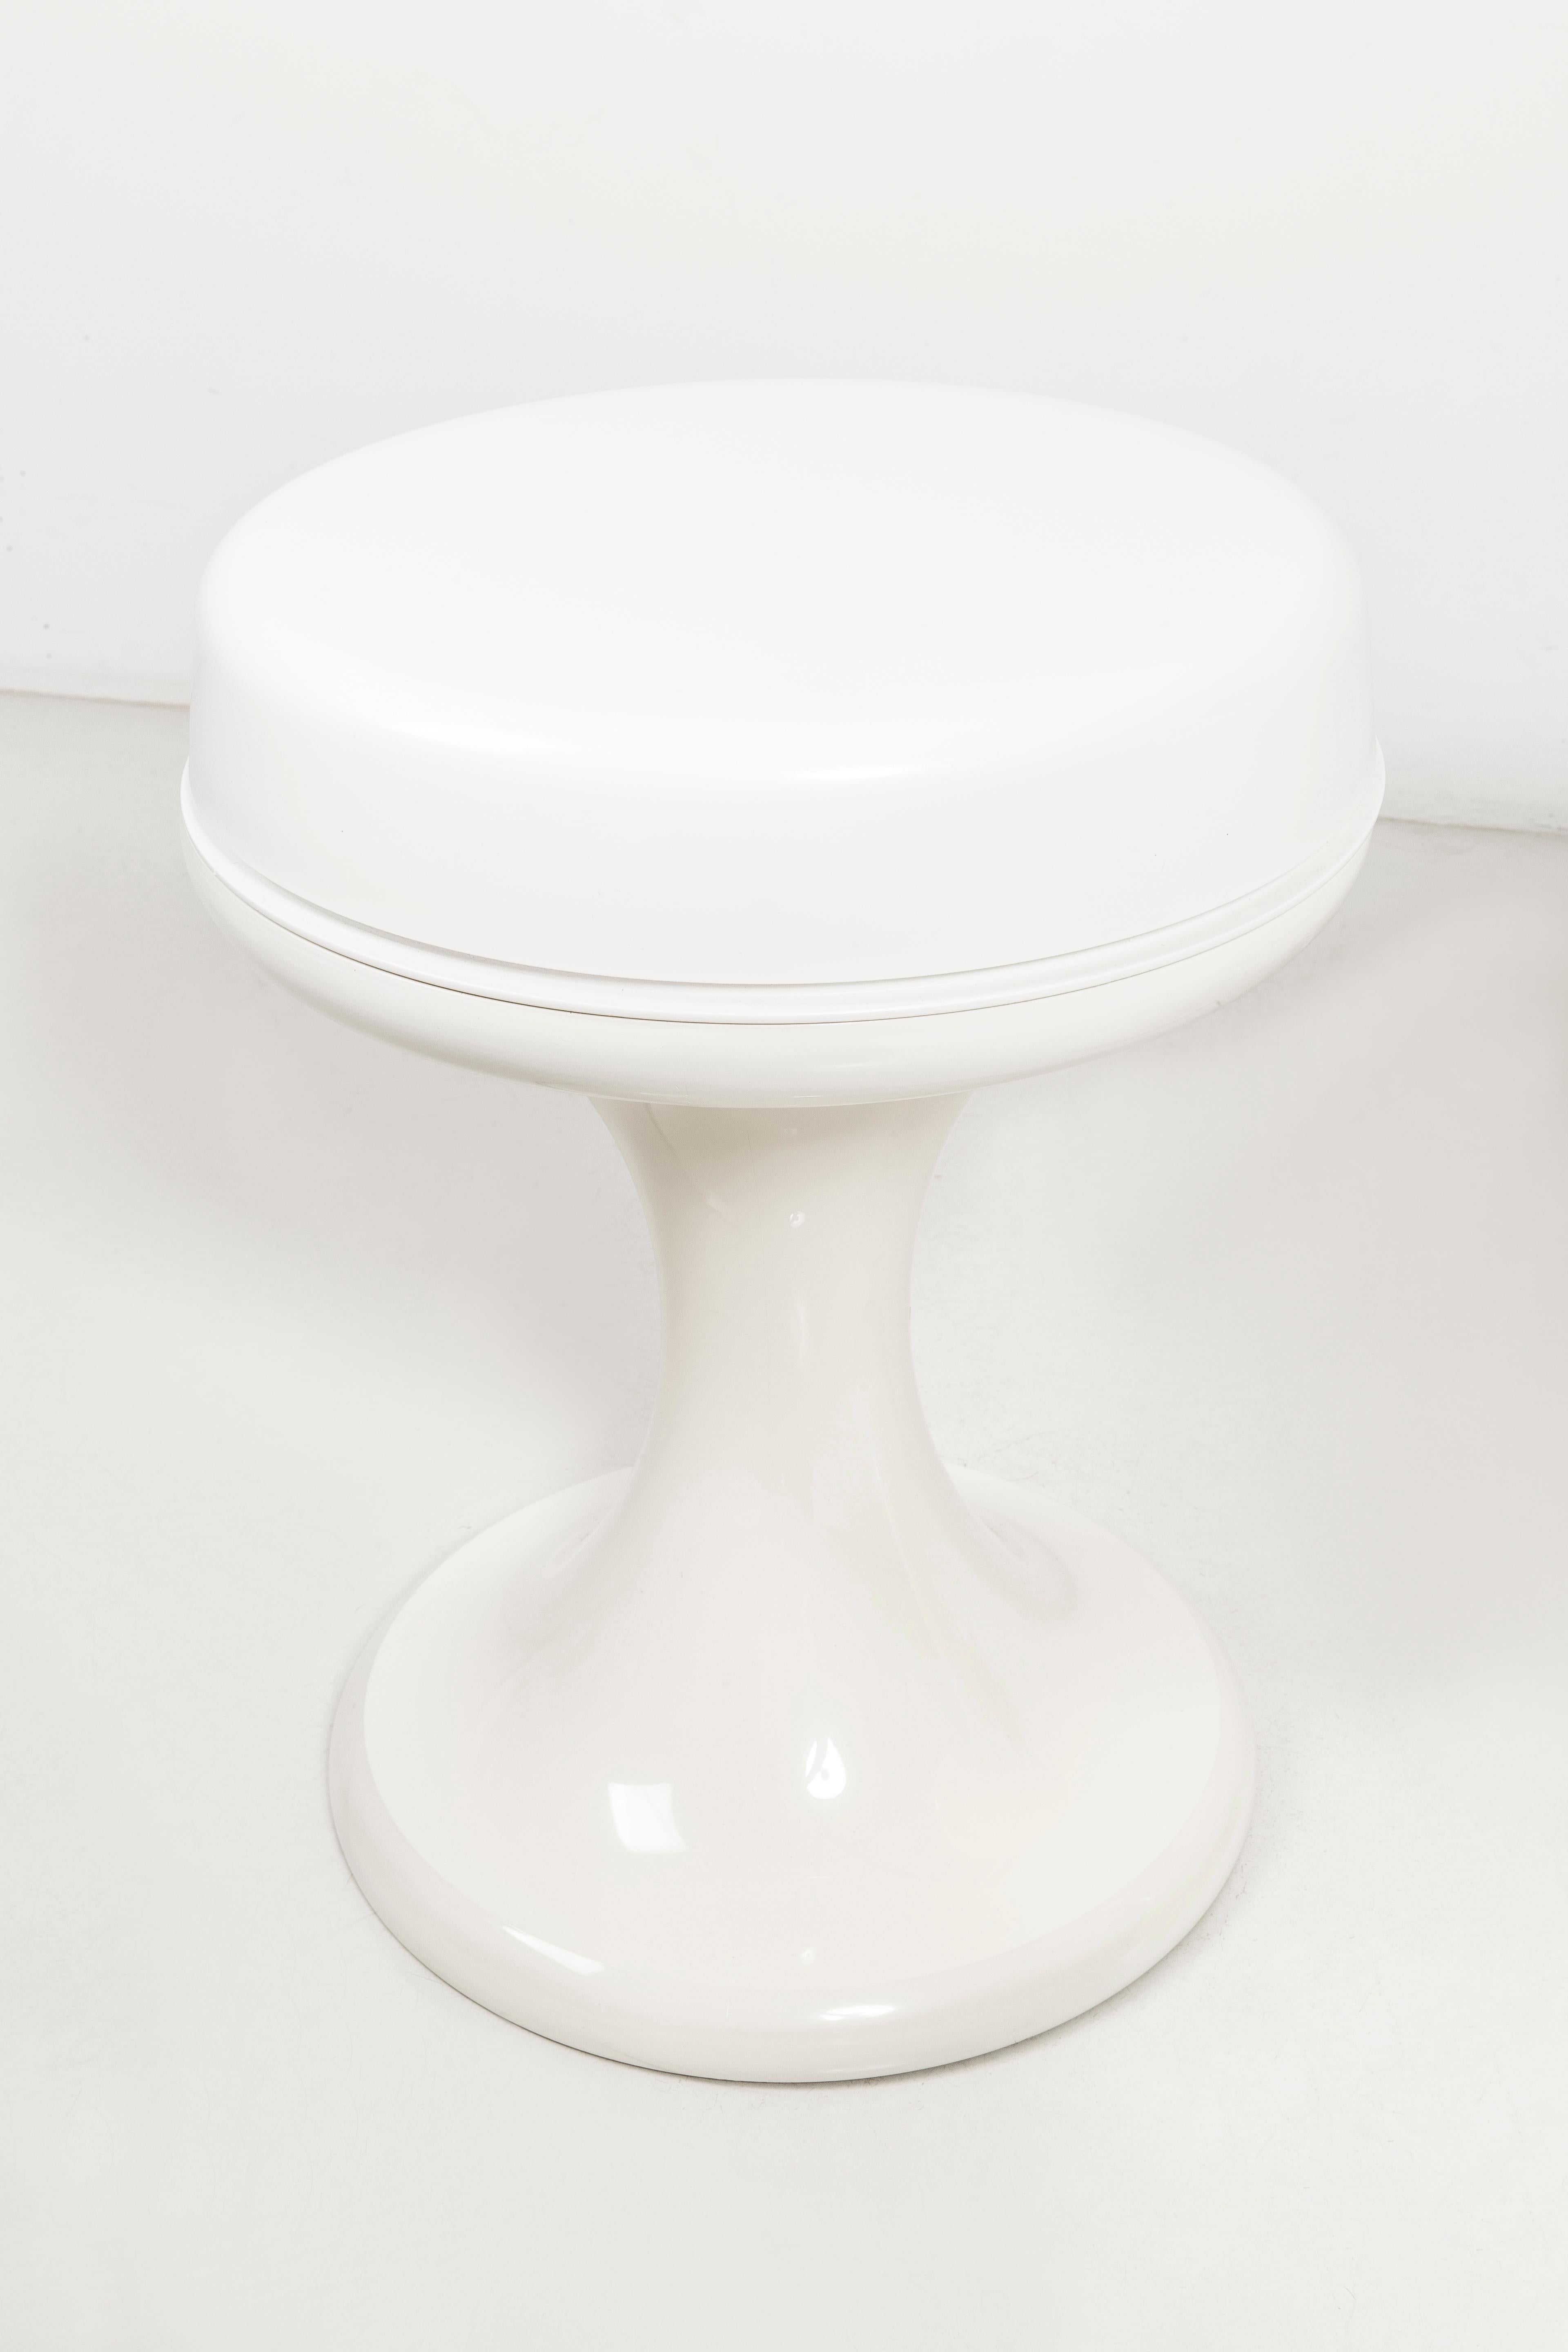 20th Century Set of 2 White EMSA Stool, Germany, 1960s For Sale